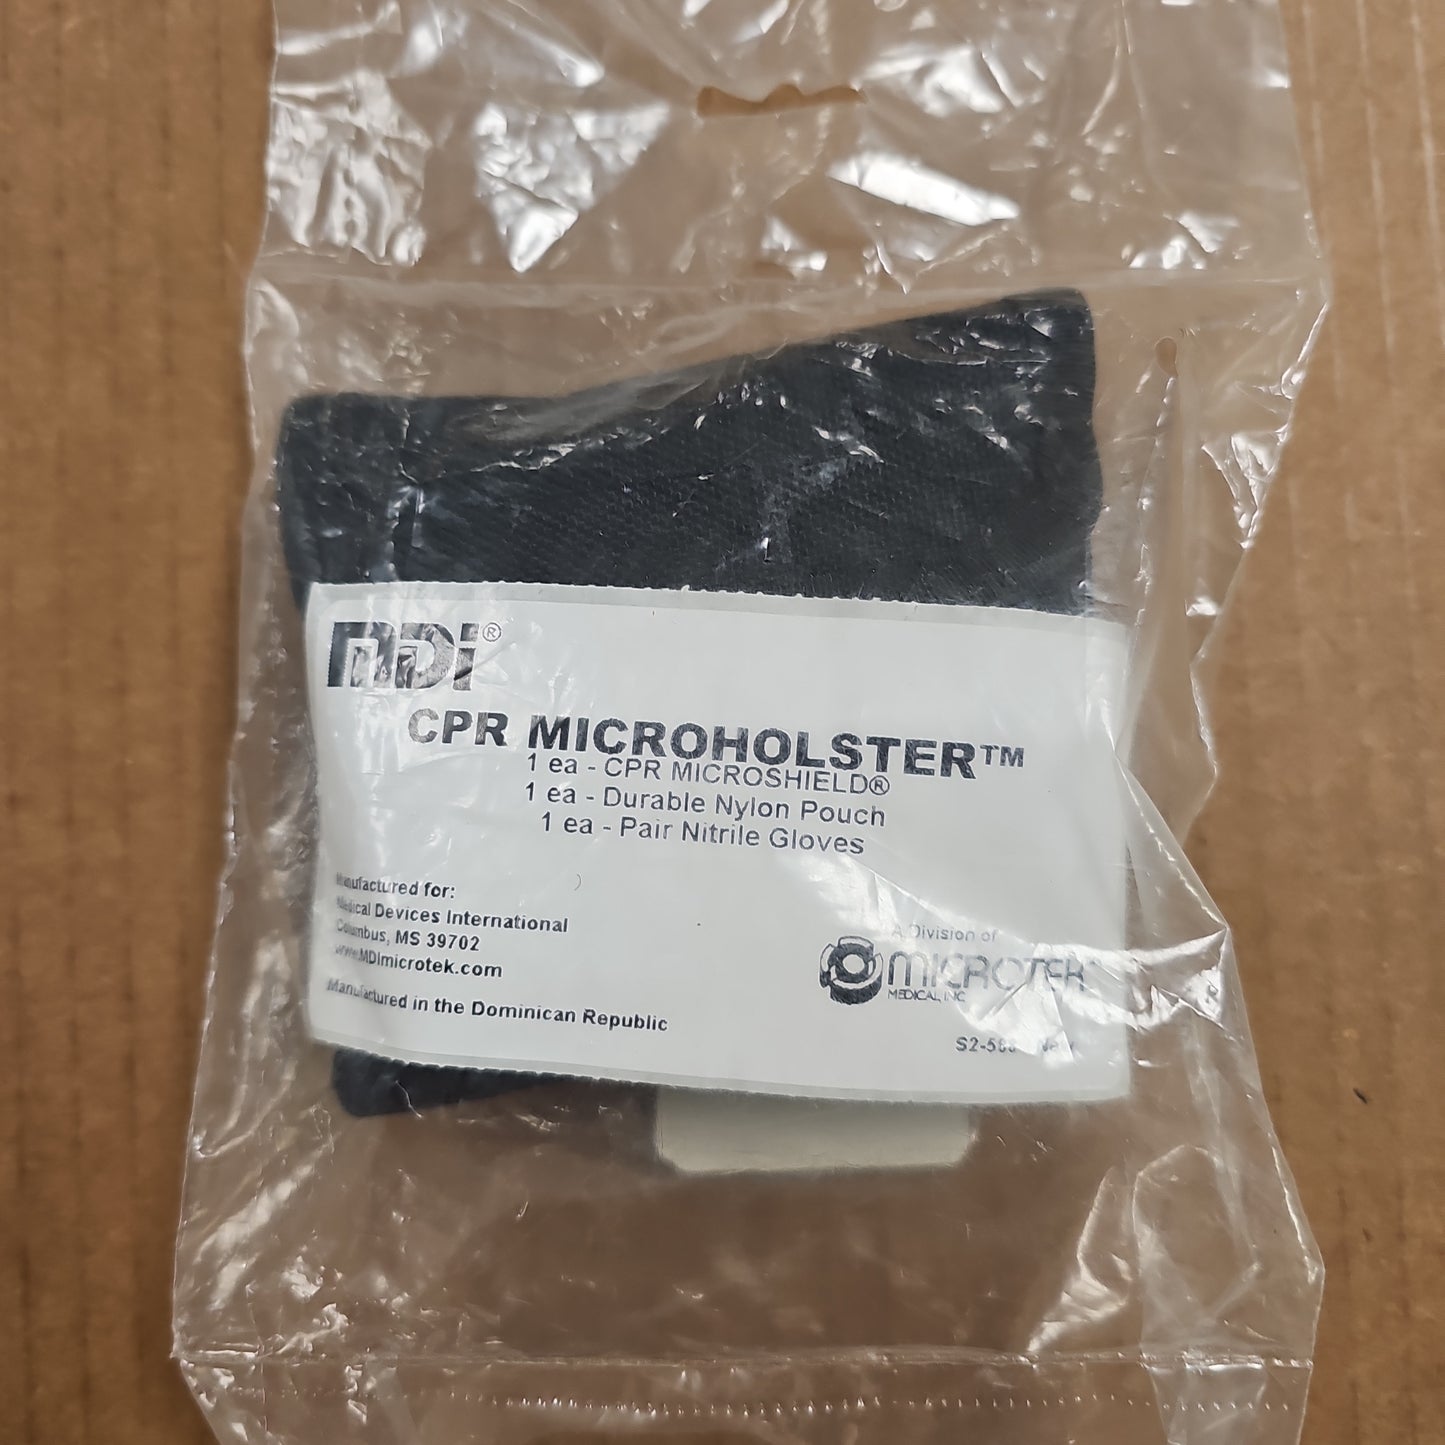 CPR KIT: MICROHLSTR, INCL: MICROSHIELD/GLOVES & CASE 70-185